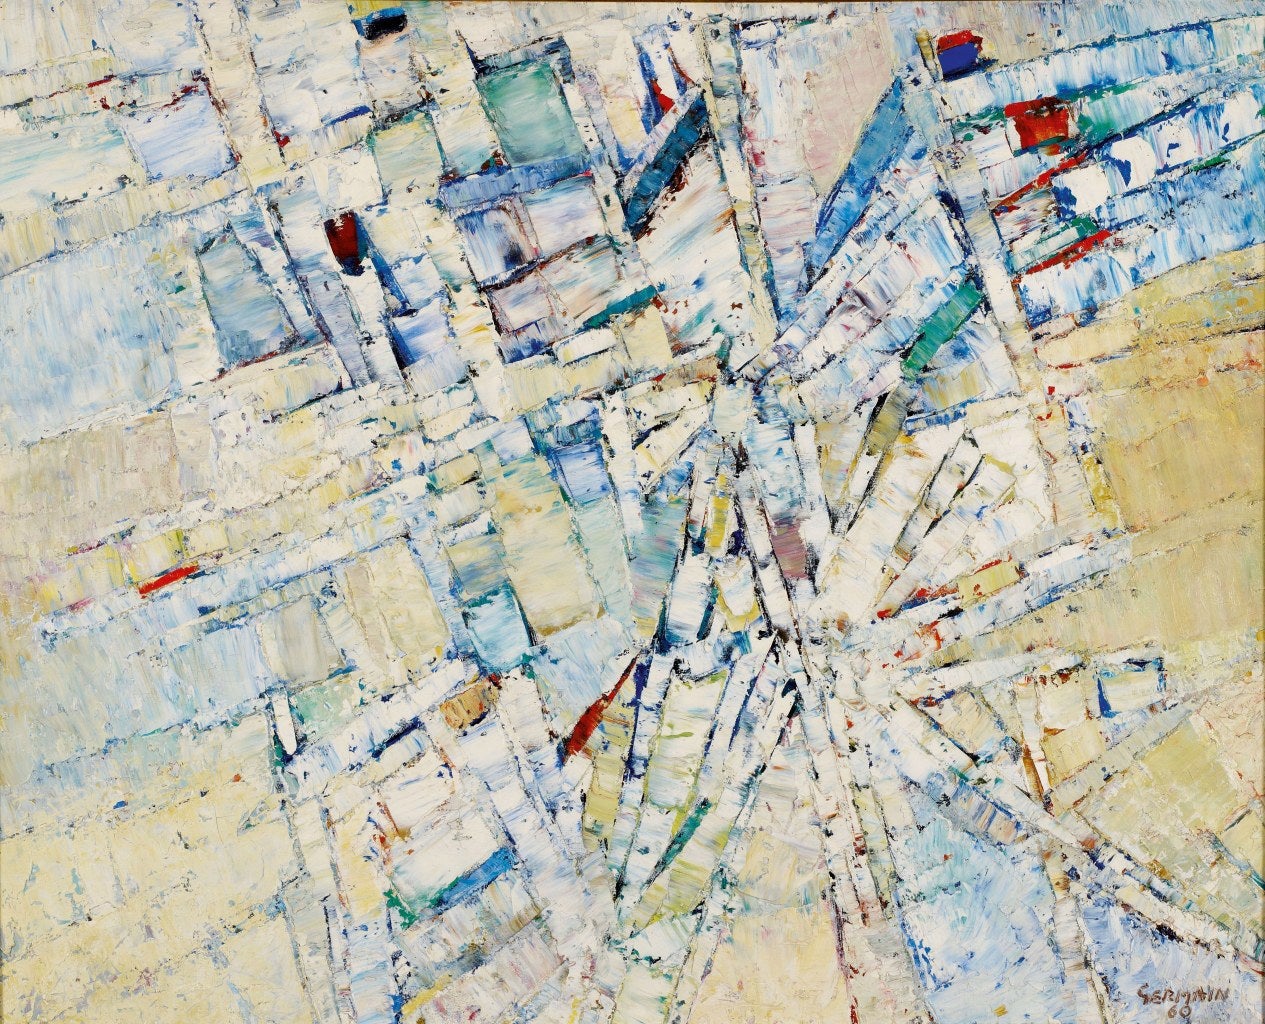 Signed and dated lower right: " Germain 60 "